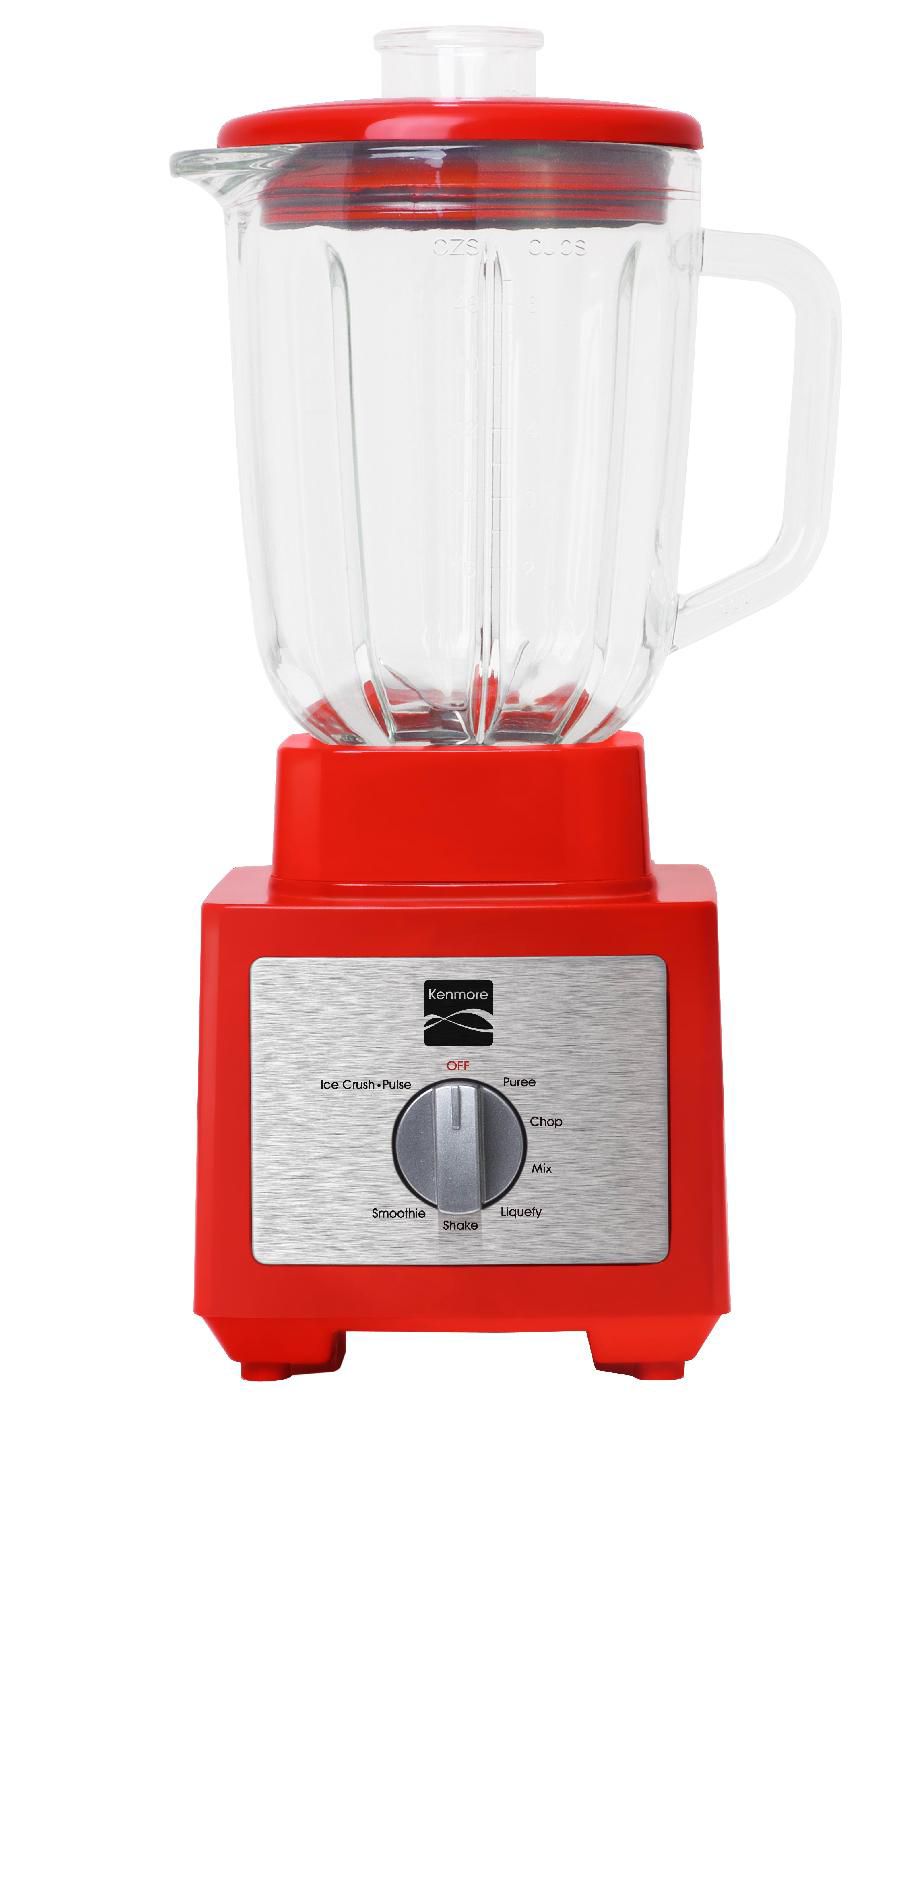 Small Kitchen Appliances and cooking gadgets at Kmart.